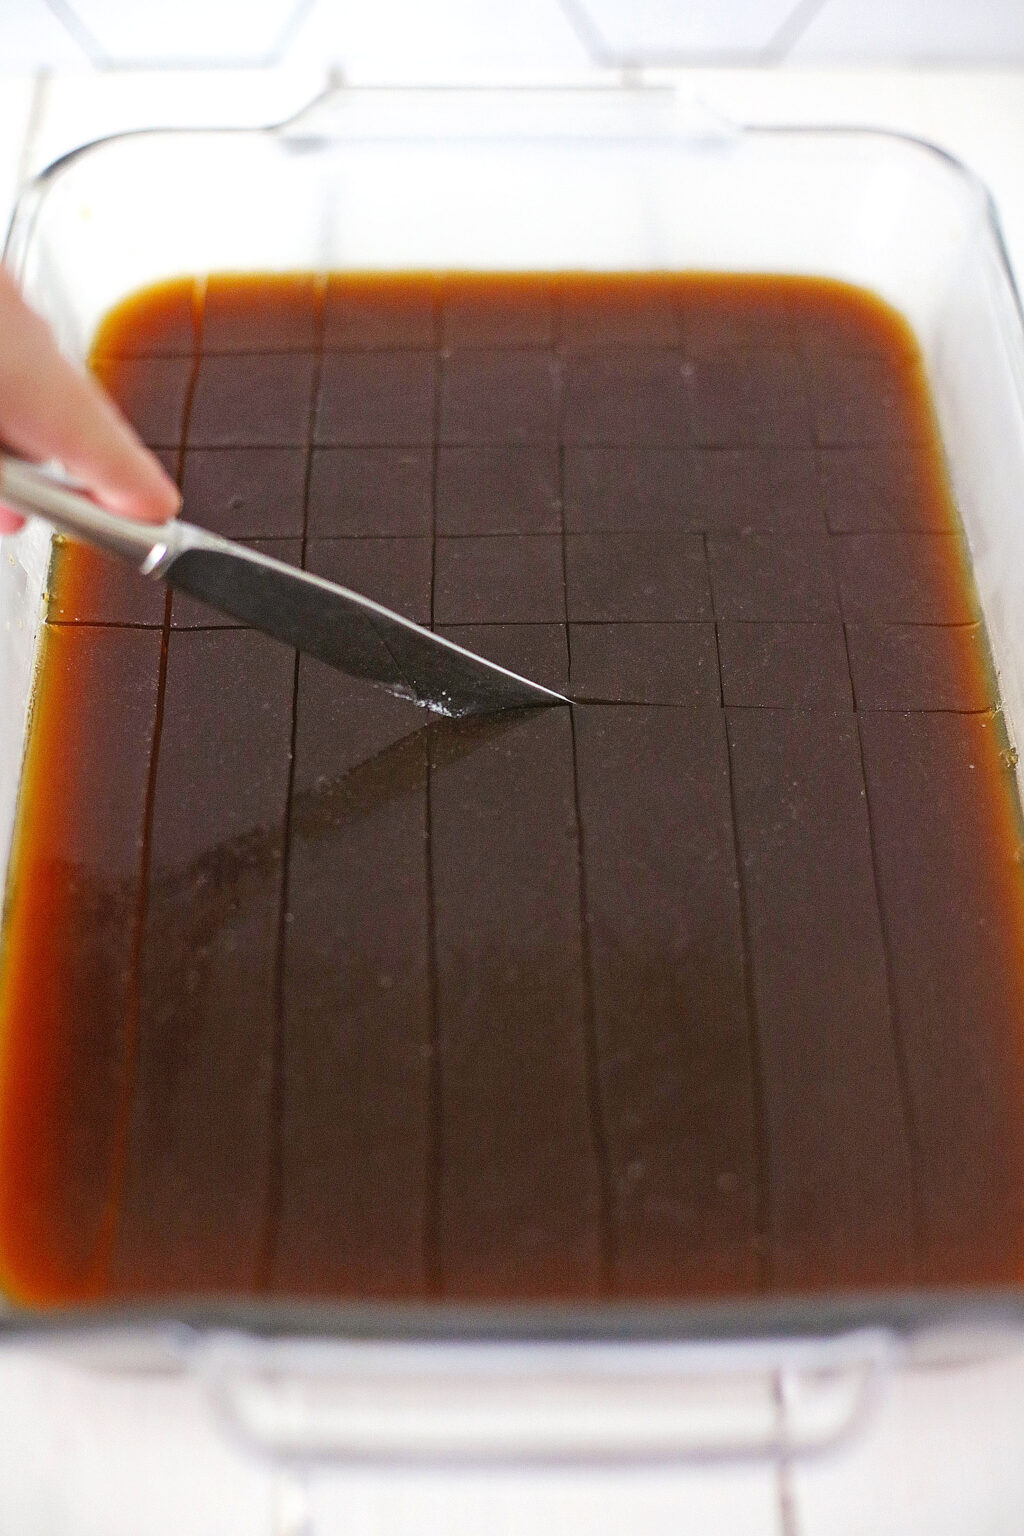 woman cutting coffee jelly into small squares using butter knife